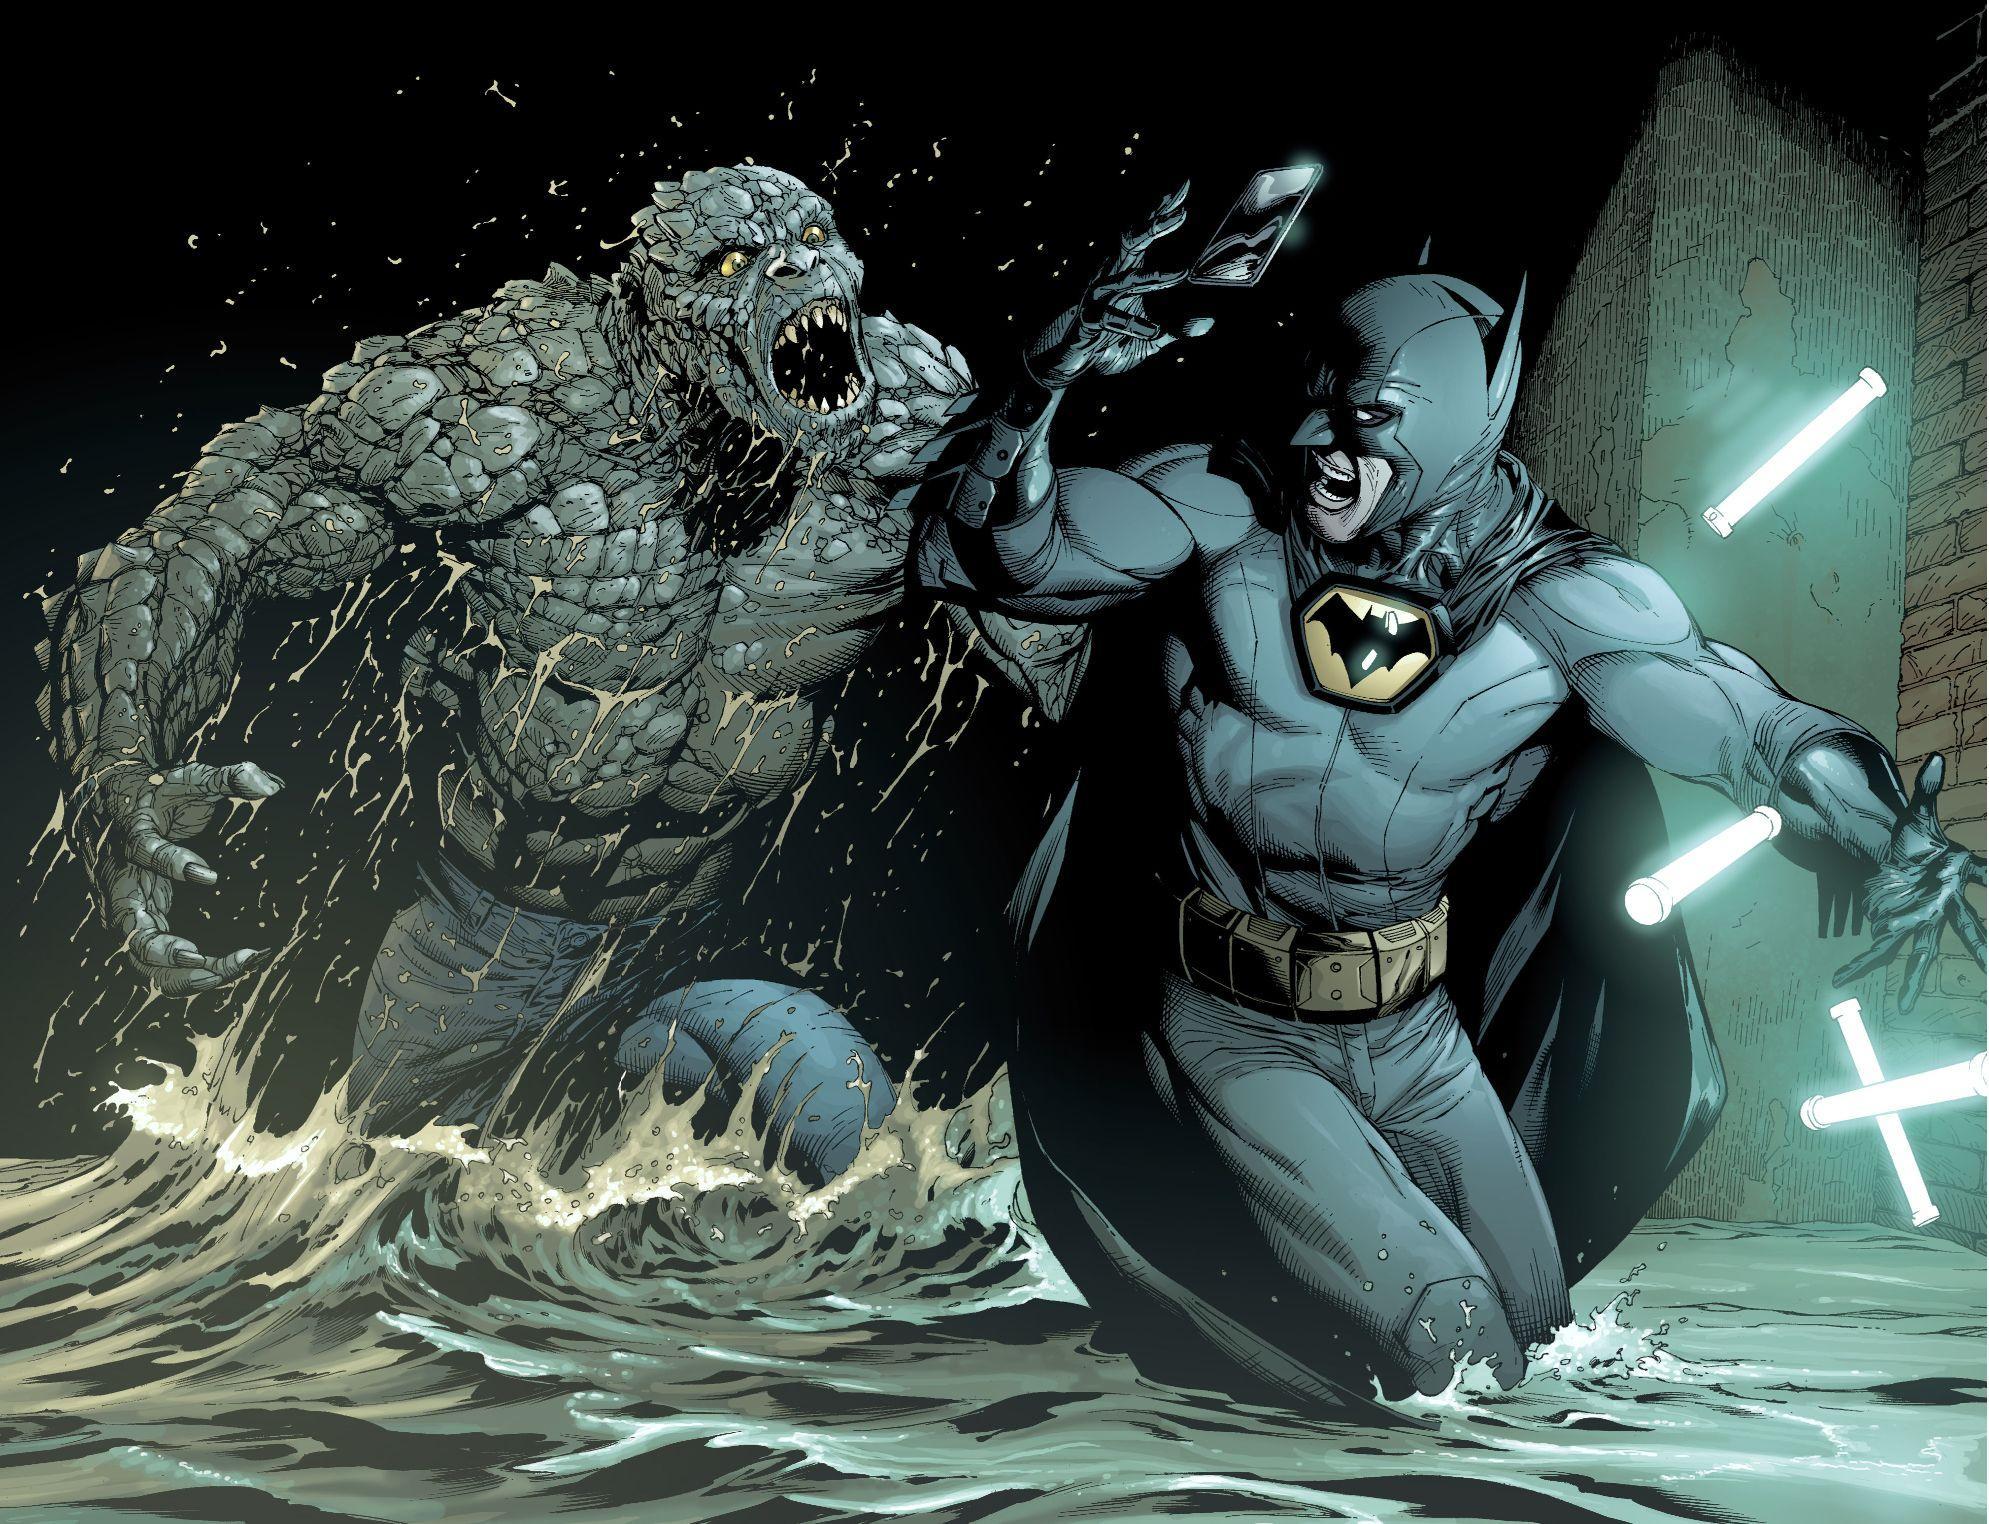 Killer Croc screenshots, image and picture